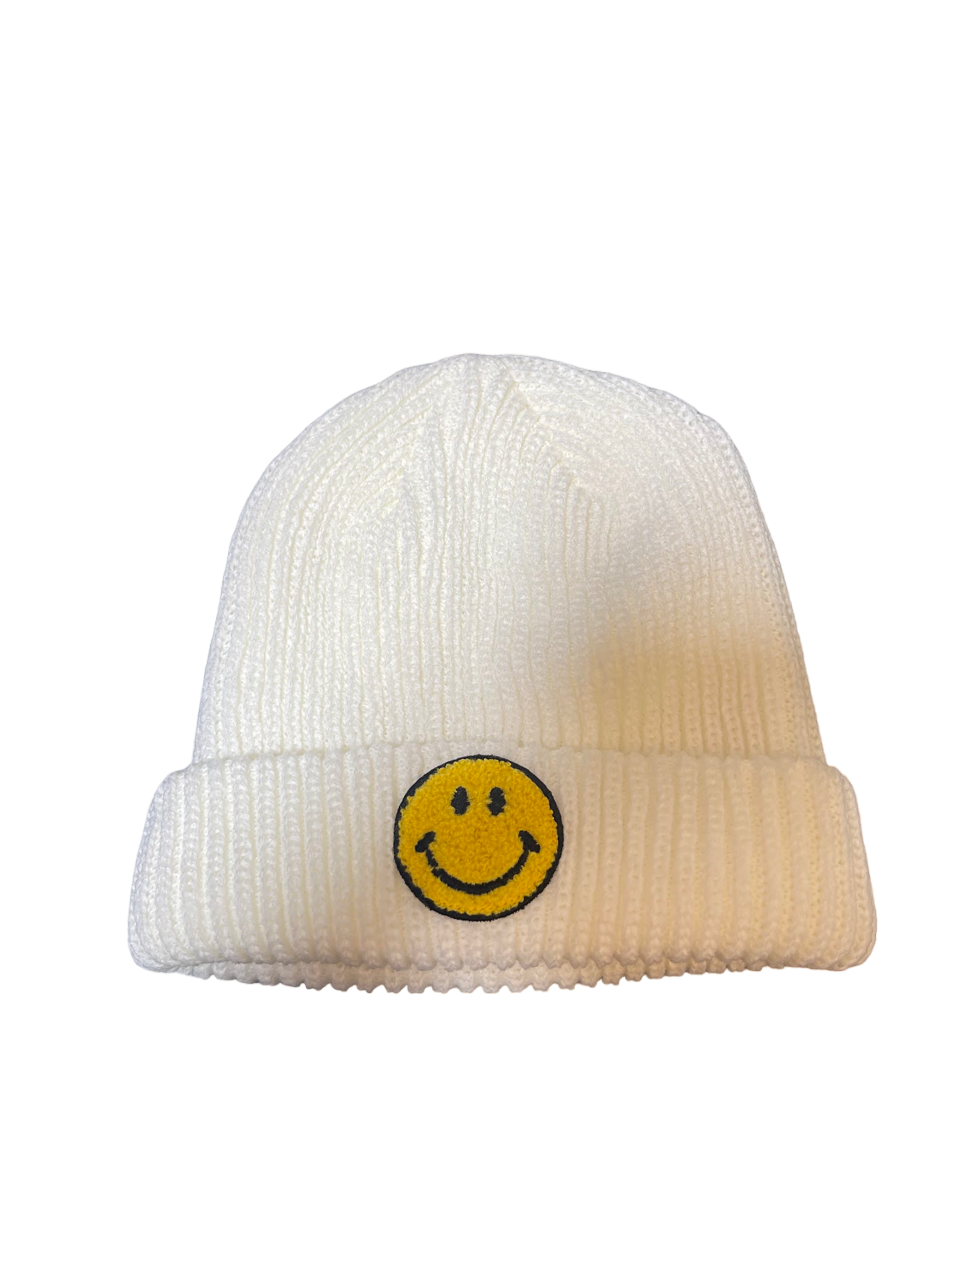 Cream With Yellow Smiley Hat